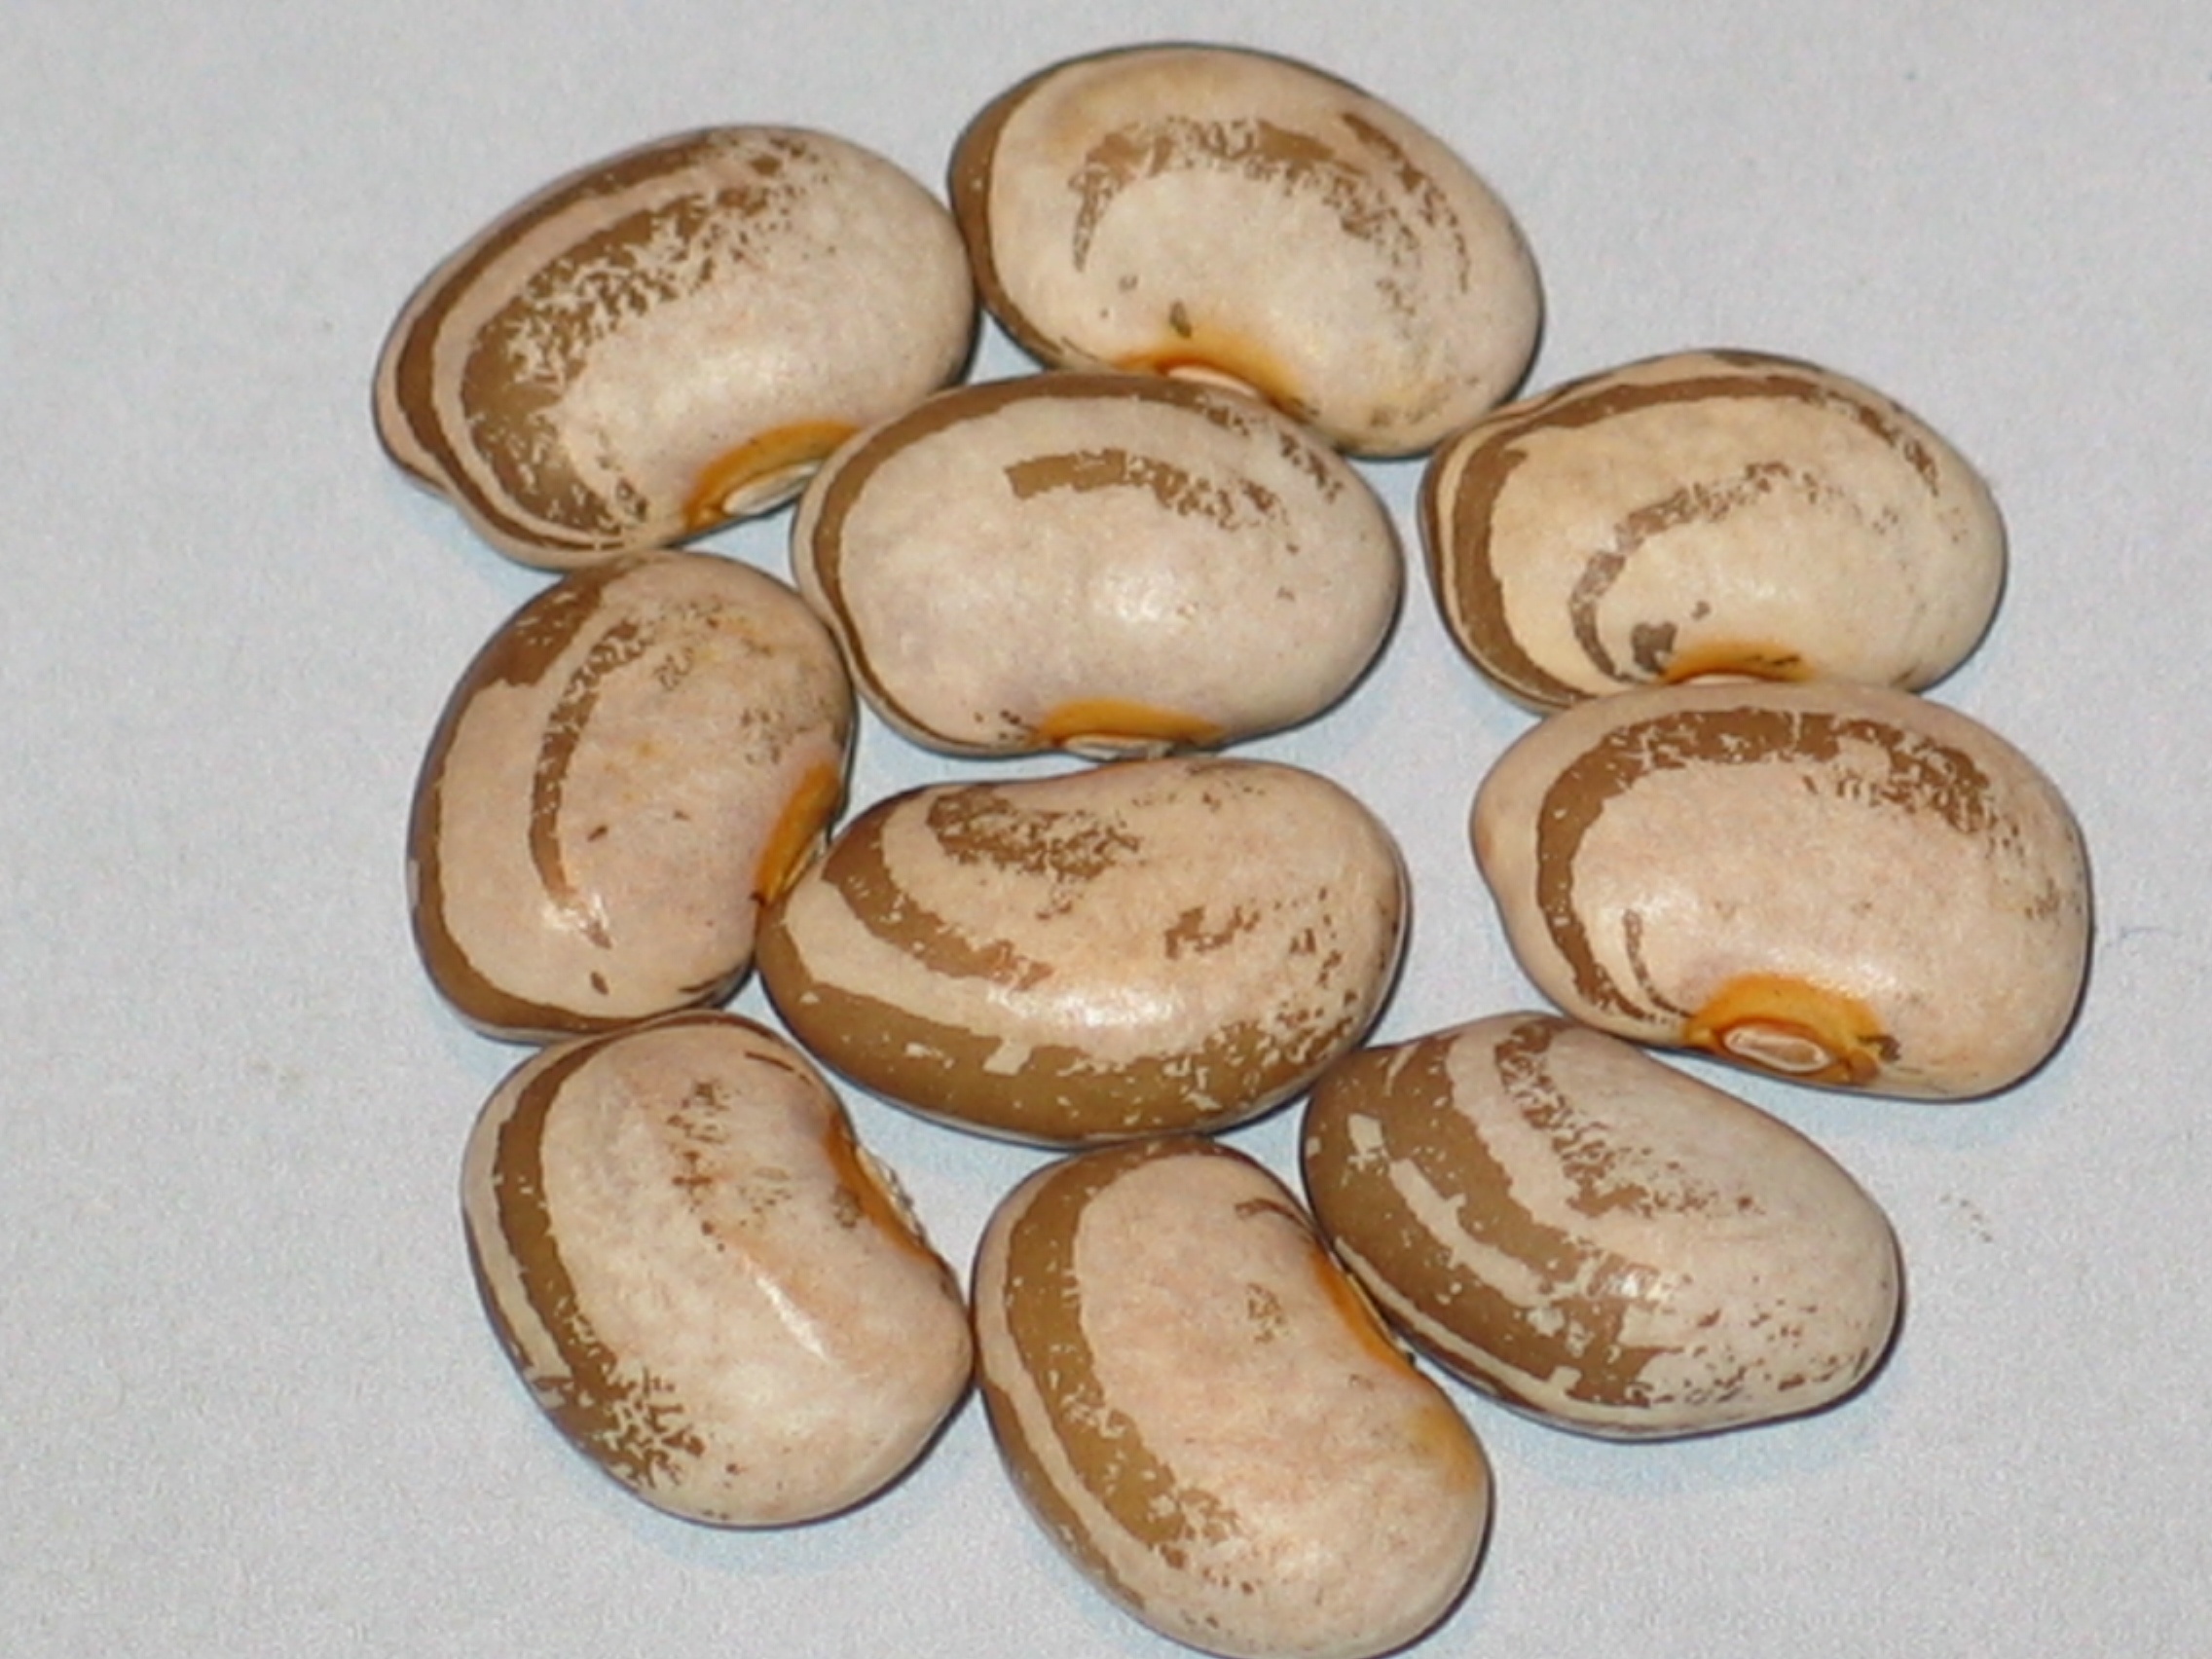 image of Indian Mound beans